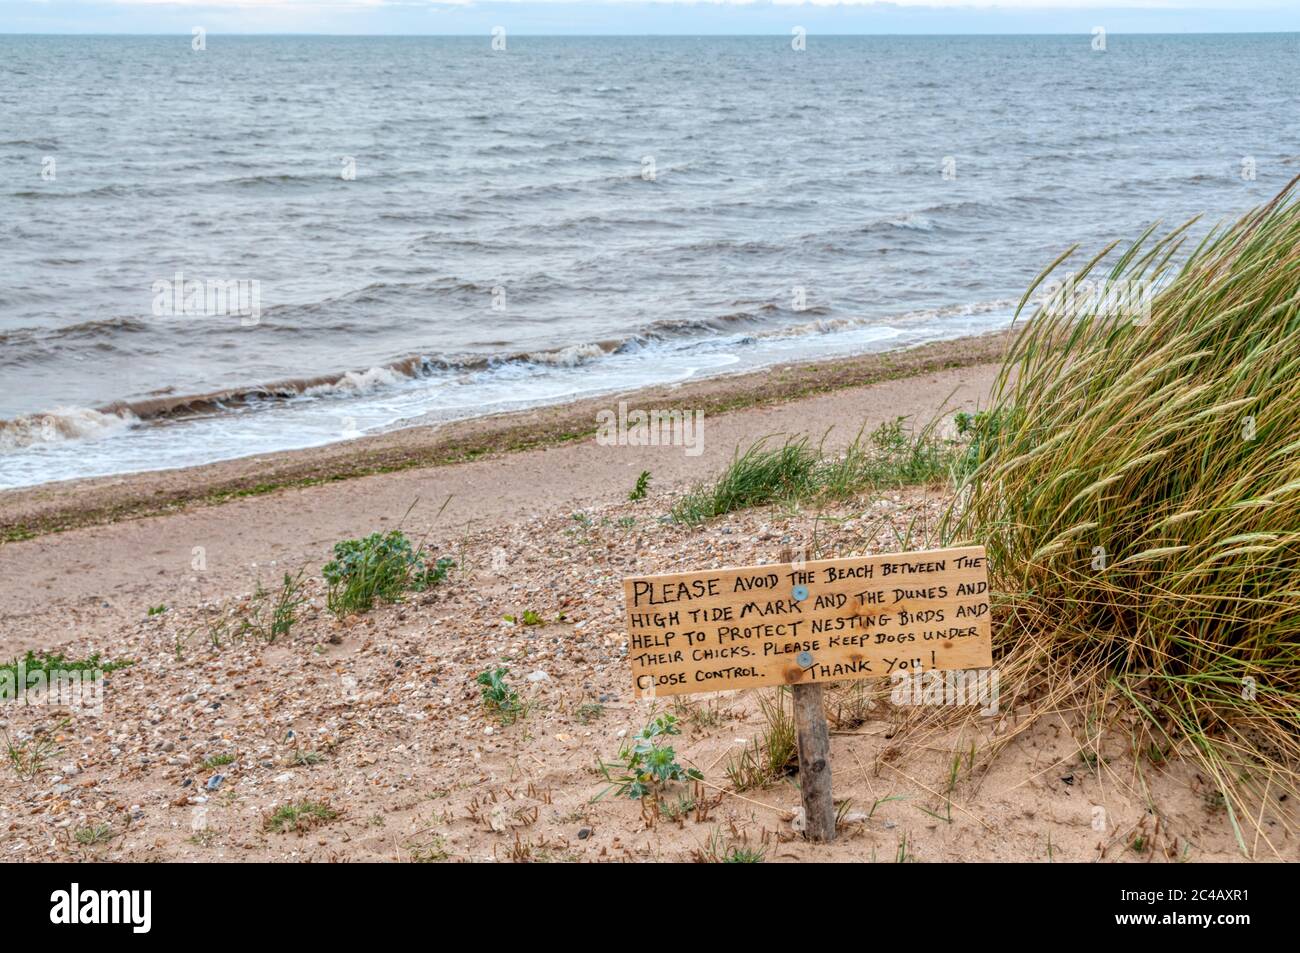 Sign at Snettisham beach on east side of Wash asks people to avoid the beach to protect nesting birds.  SEE NOTES FOR DETAILS. Stock Photo